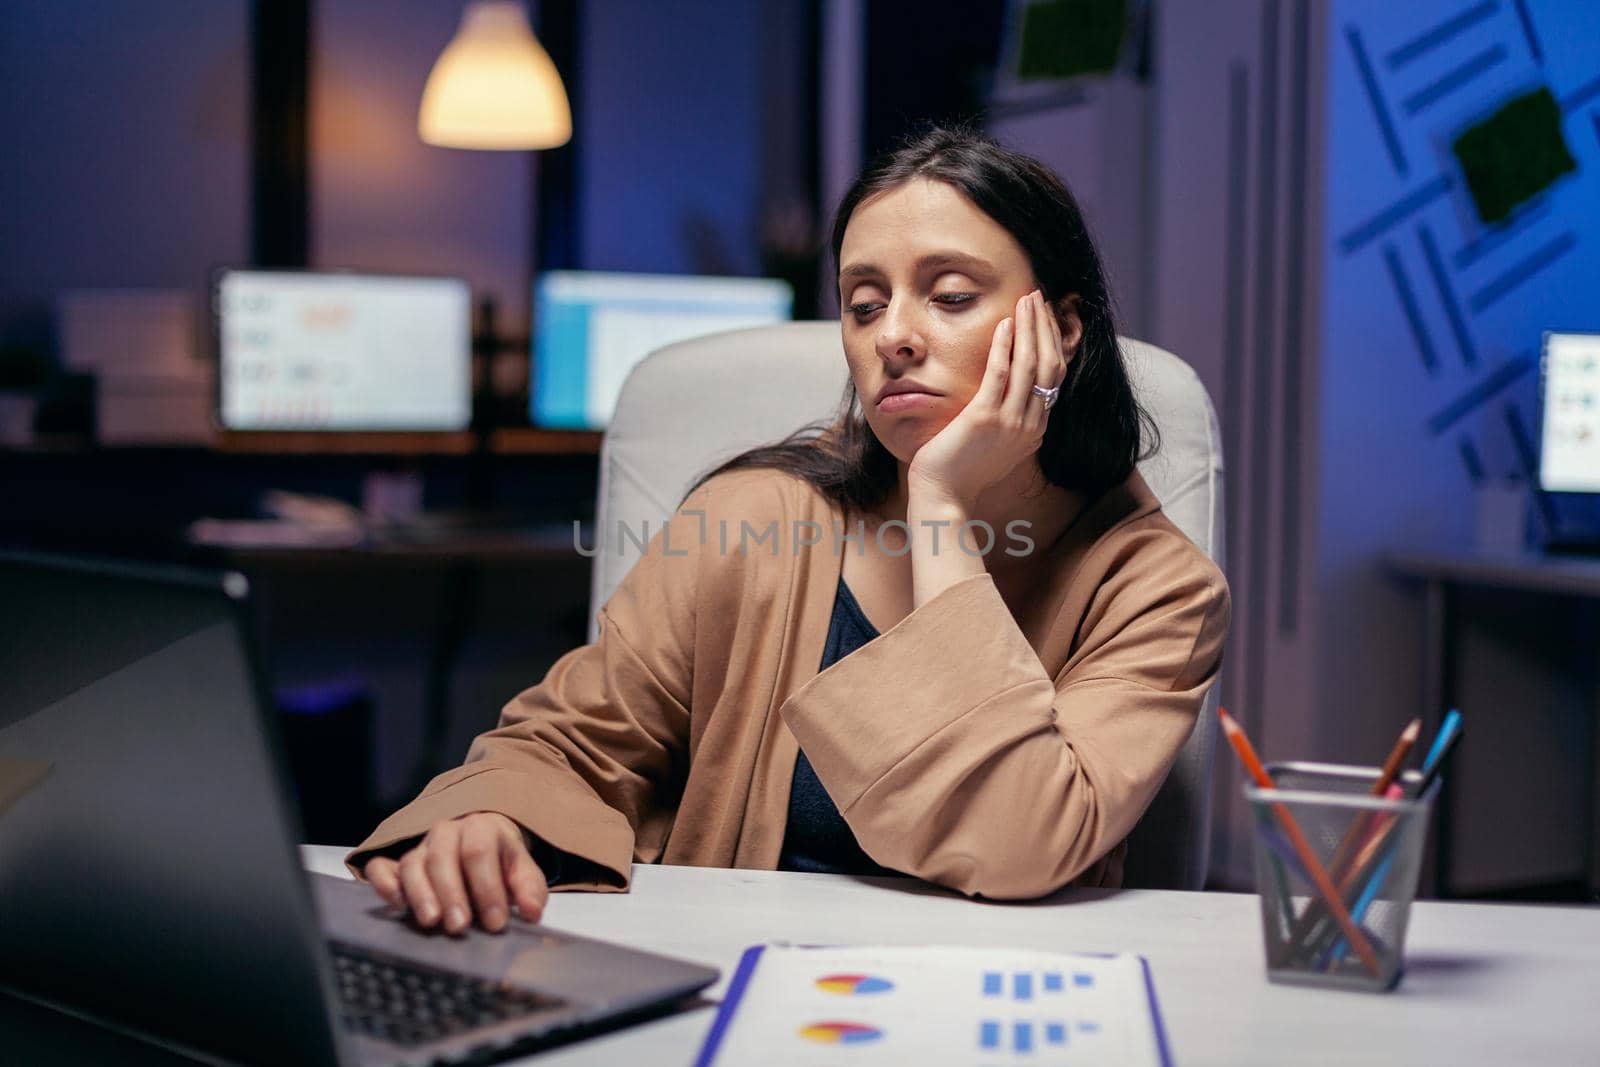 Exhausted businesswoman looking at computer by DCStudio